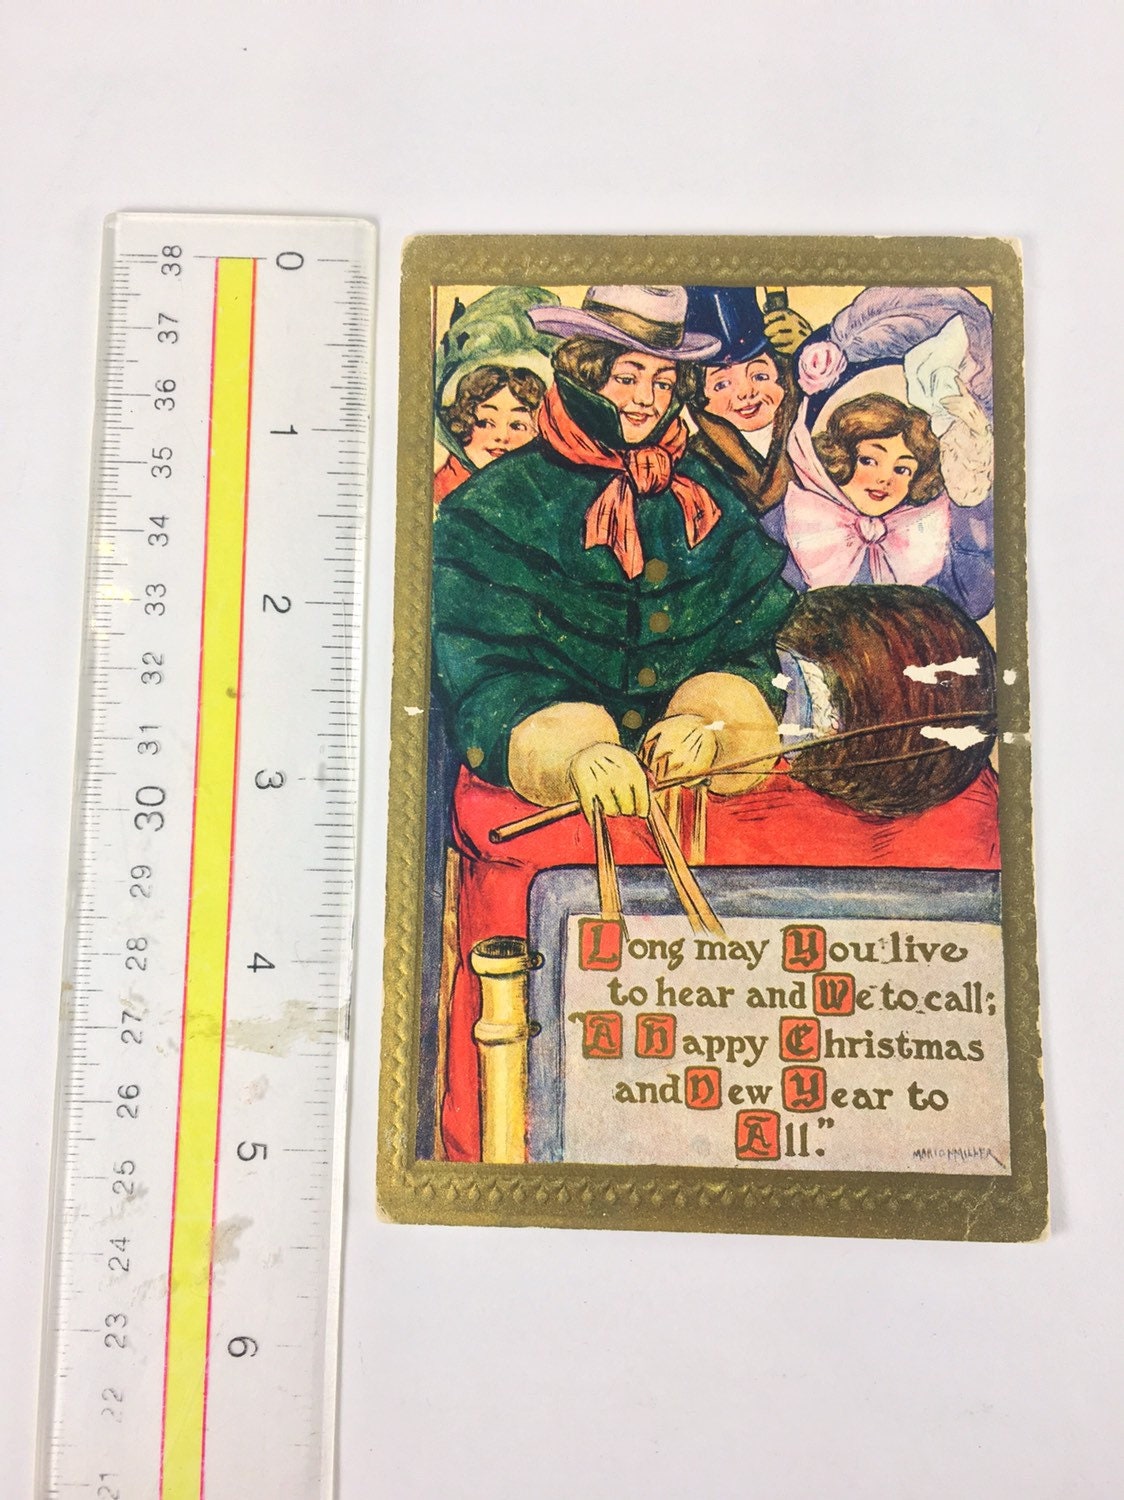 1907 Vintage Christmas & New Year celebrations postcard. Unused original with divided back. 1 cent postage box. Decor art prop set gift